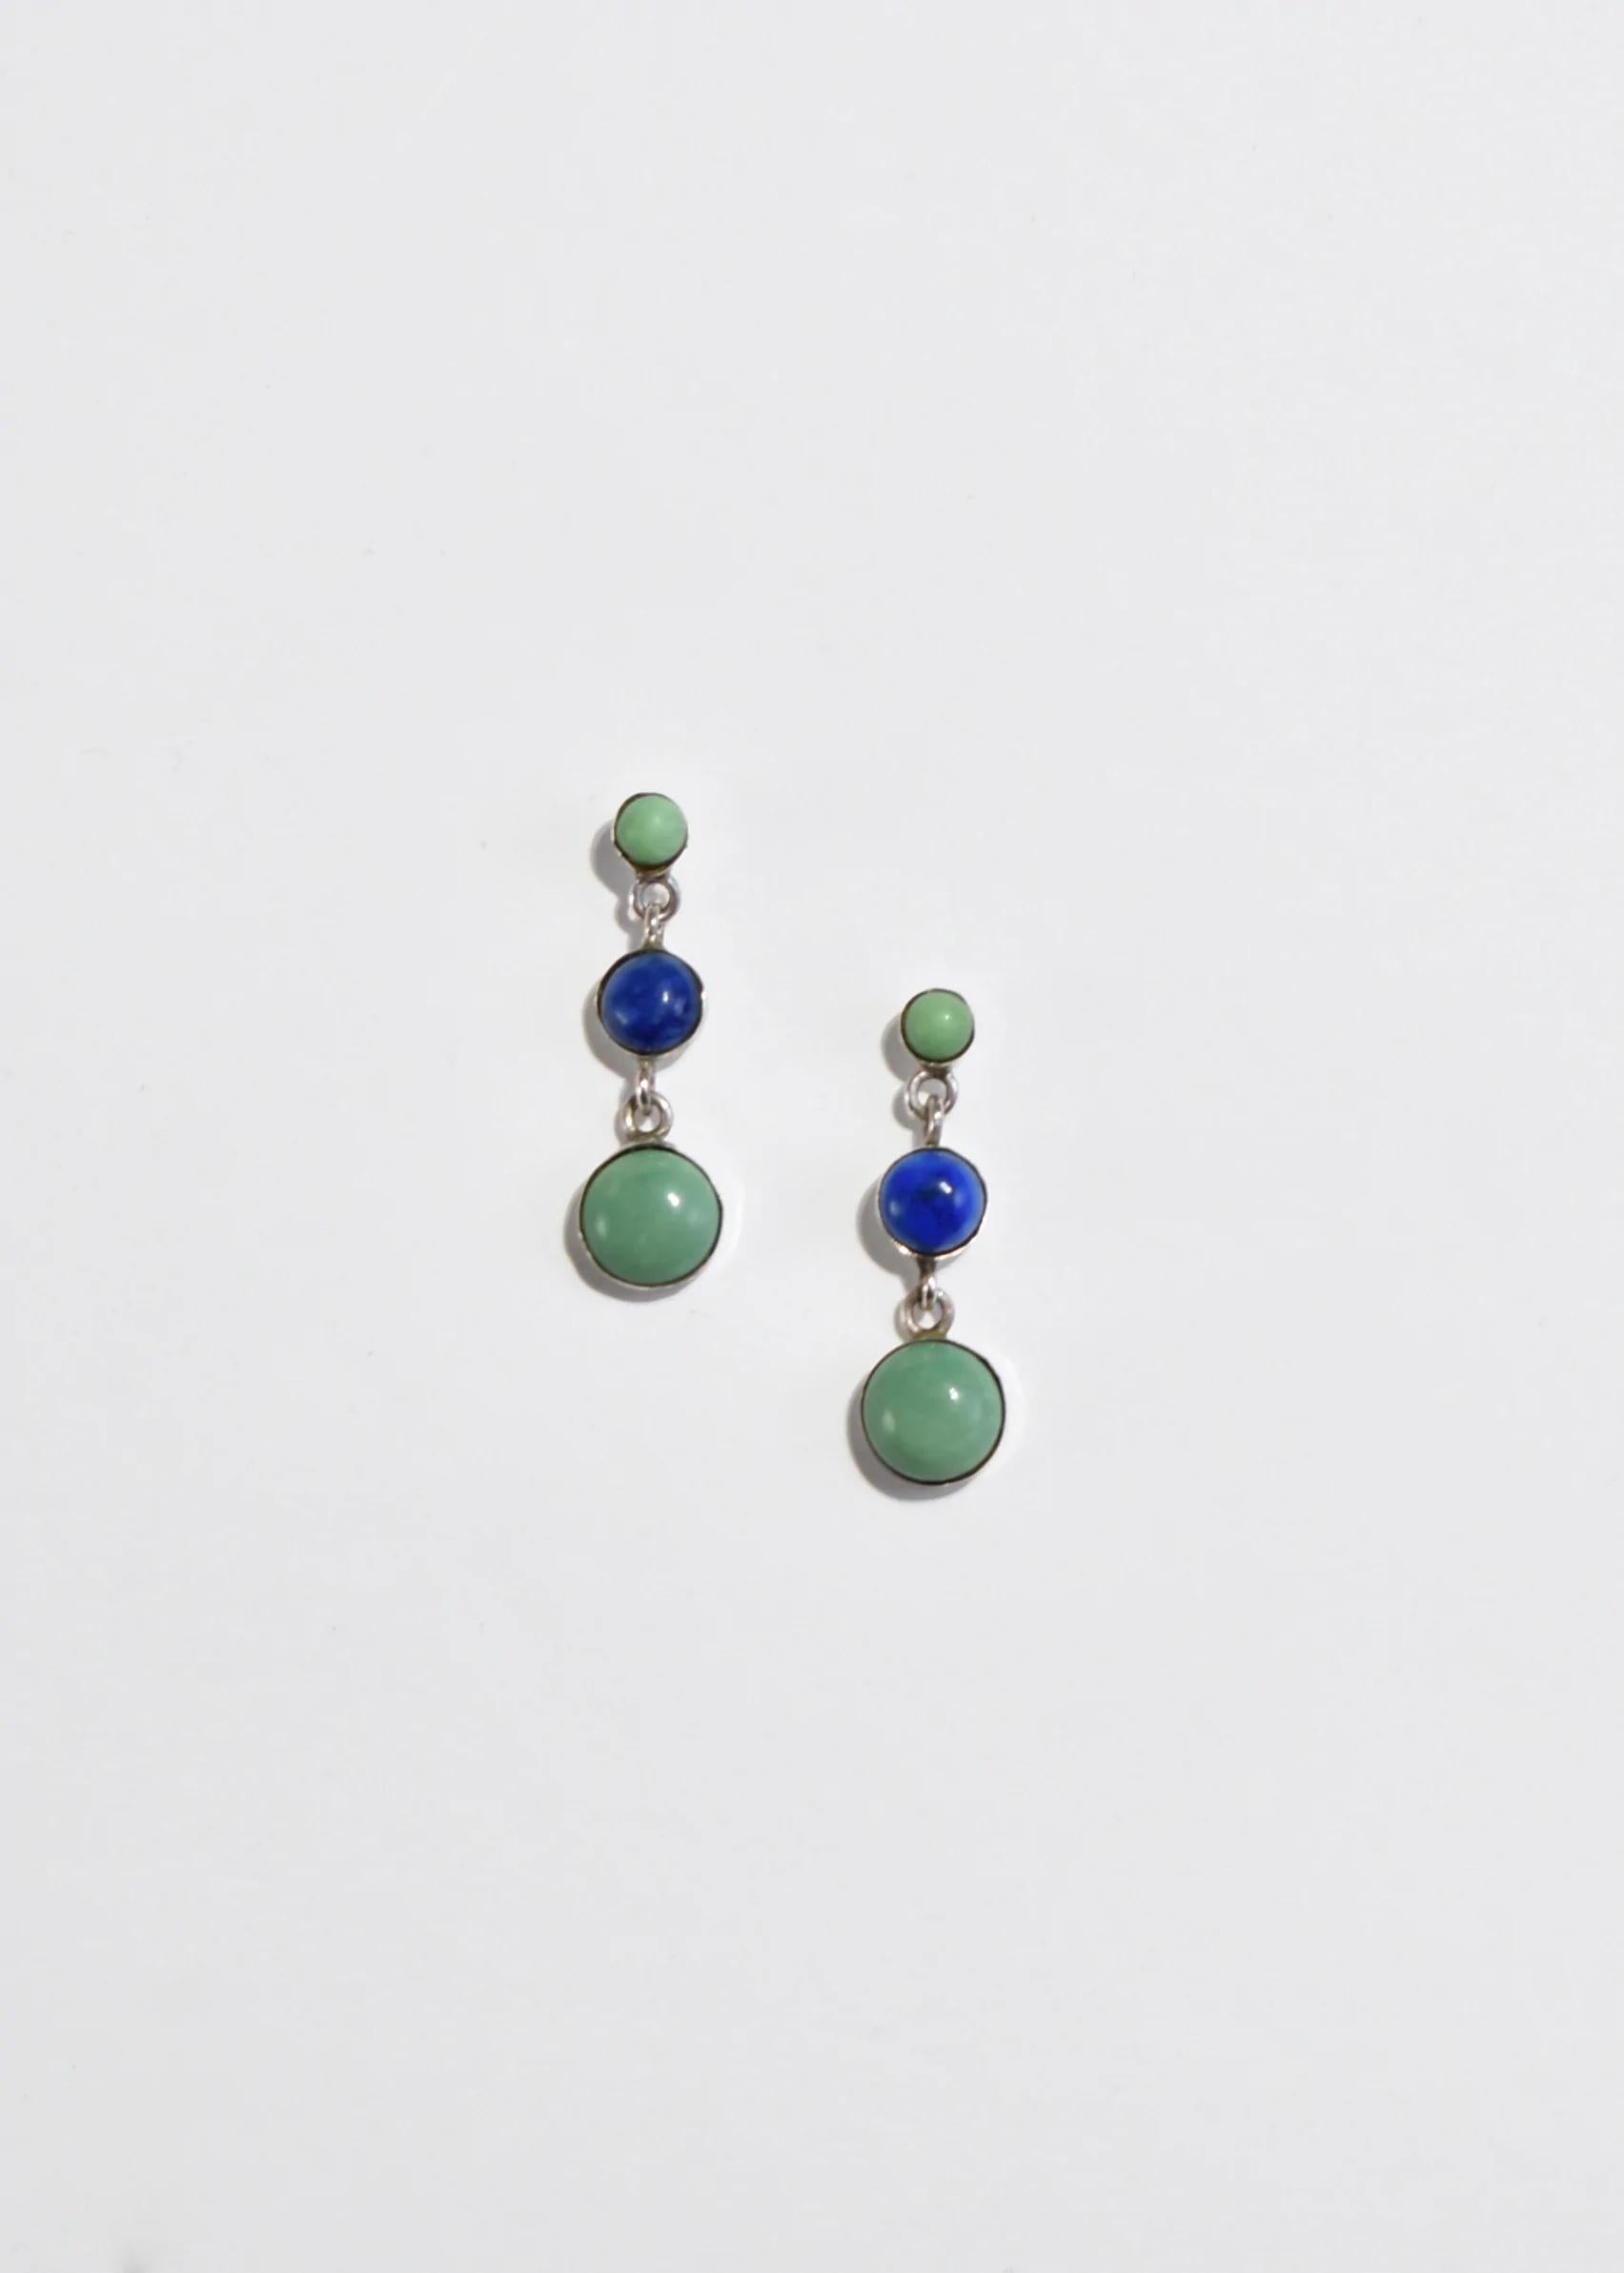 Vintage silver earrings with round cascading turquoise and lapis stones, pierced. Stamped 925.

Material: Sterling silver, turquoise, lapis lazuli.

We recommend storing in a dry place and periodic polishing with a cloth.